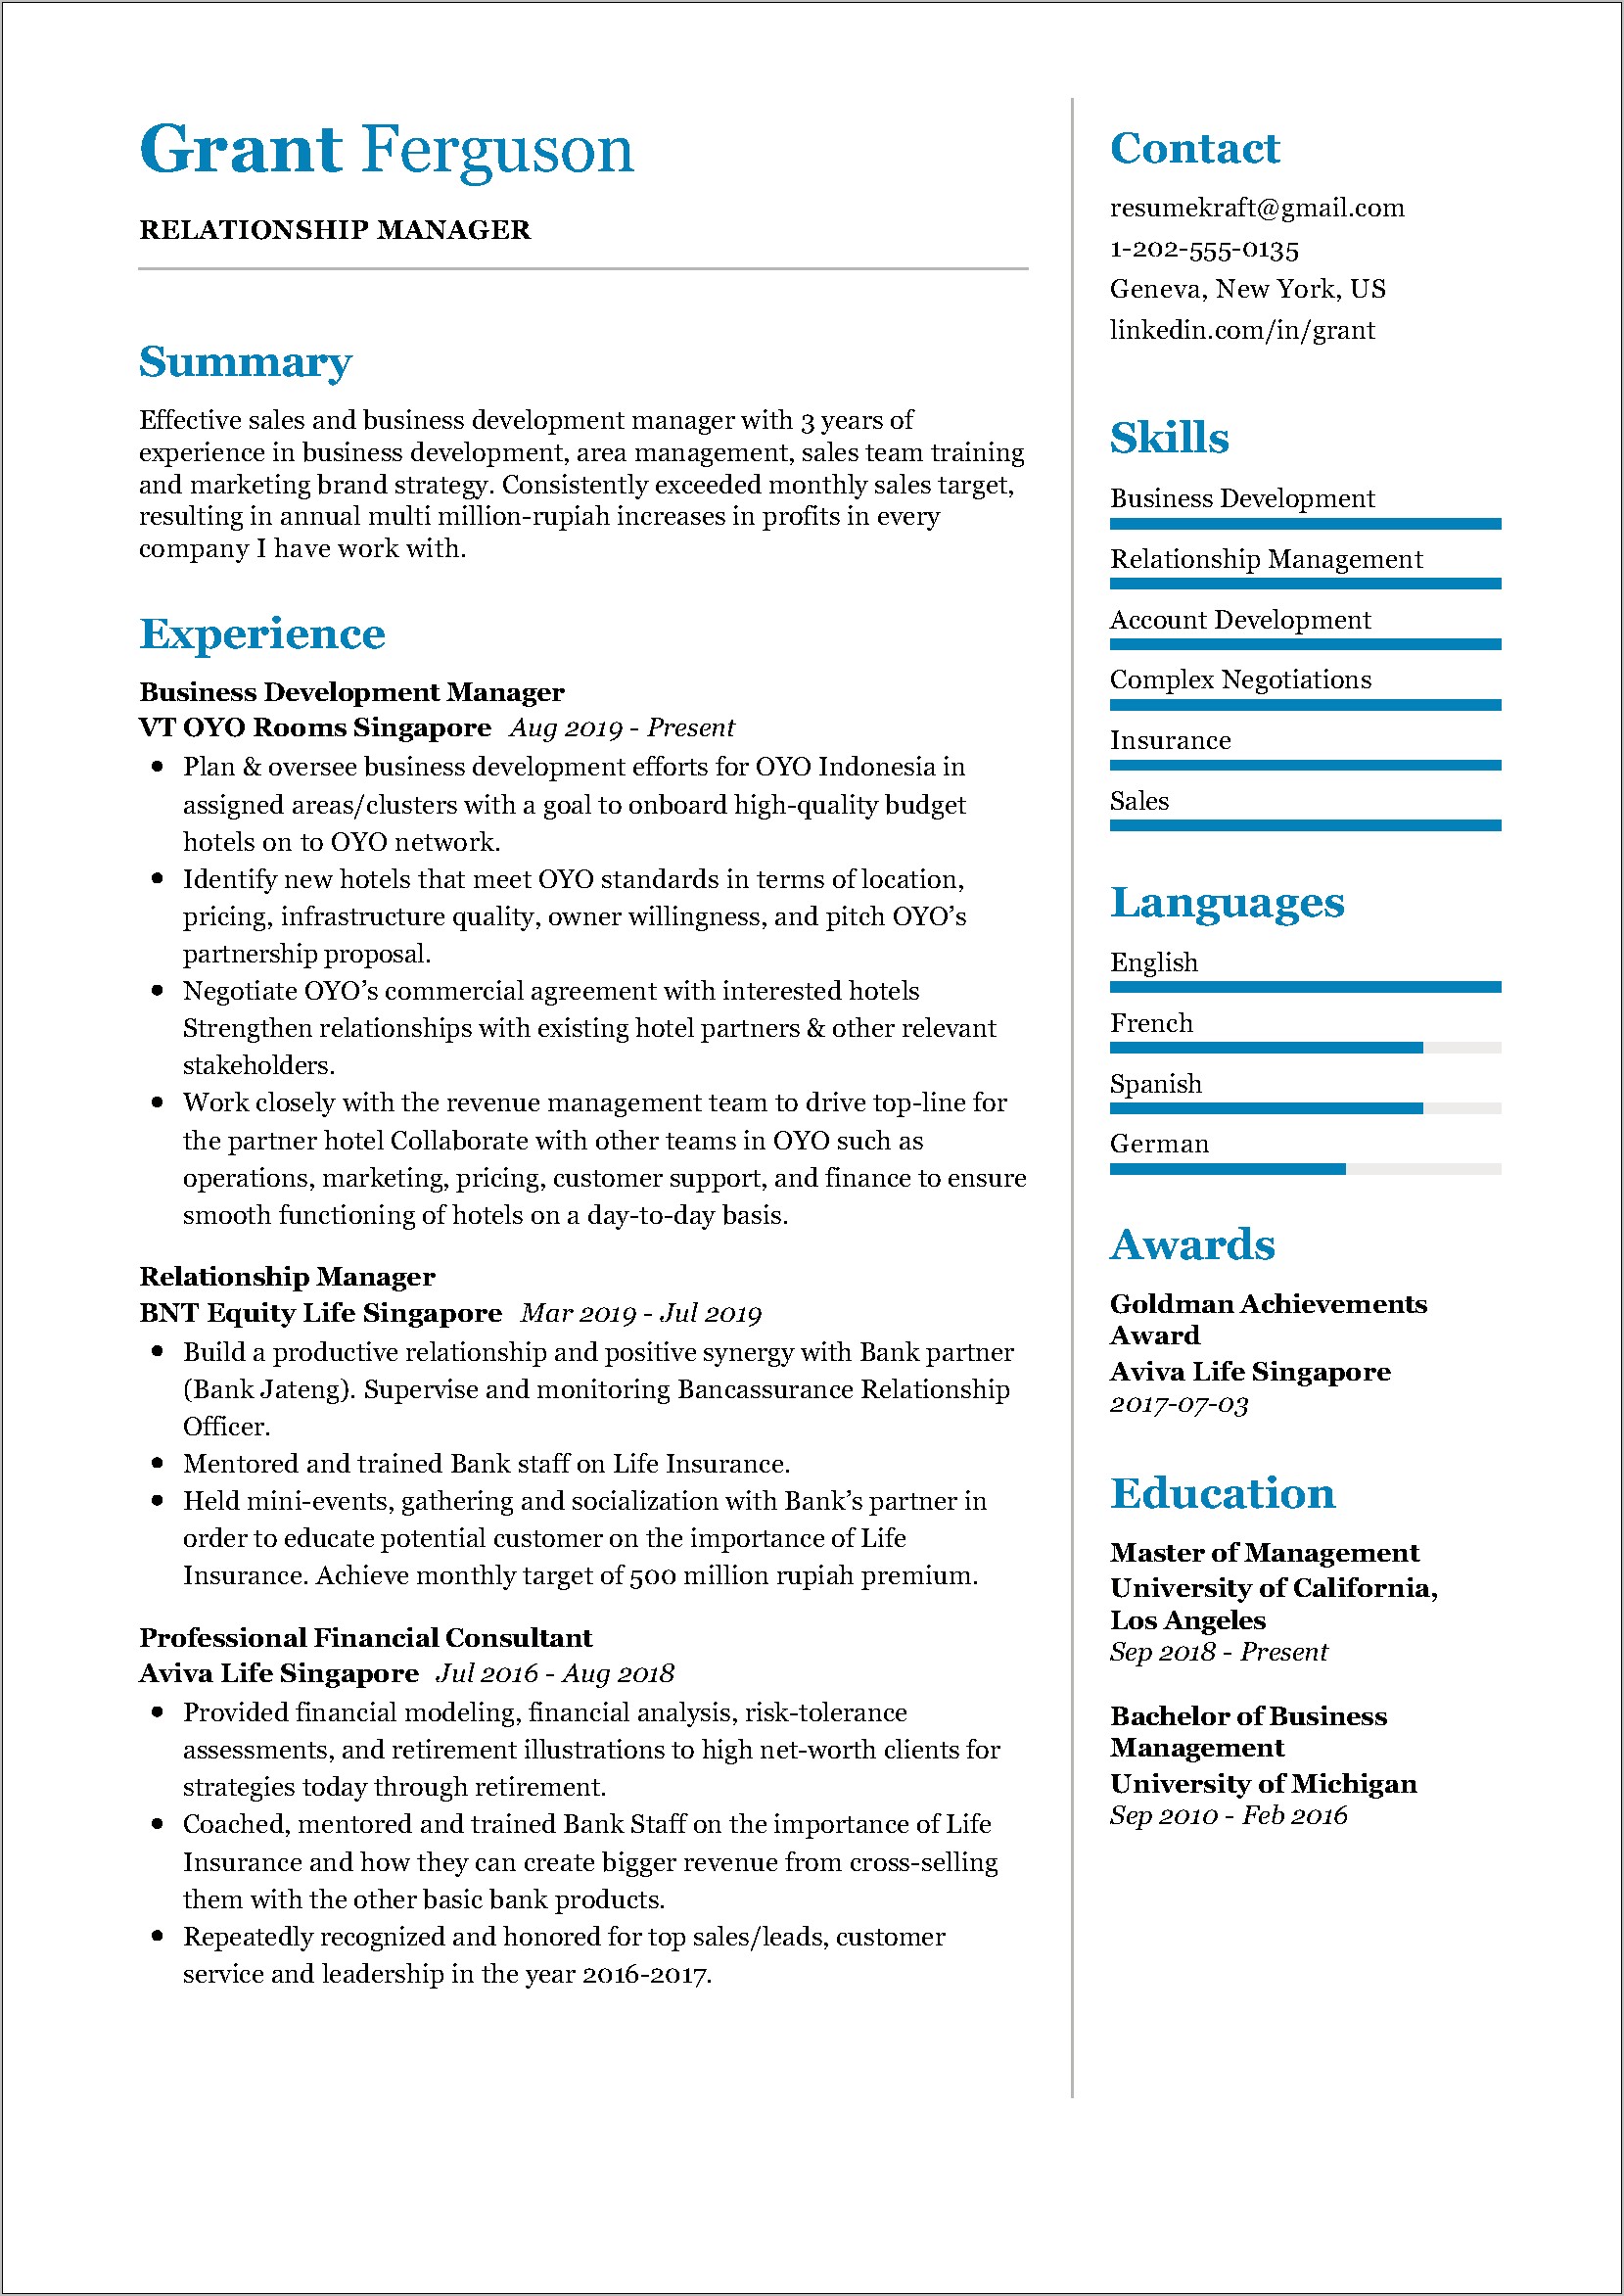 Resume Objective For Corporate Trainer